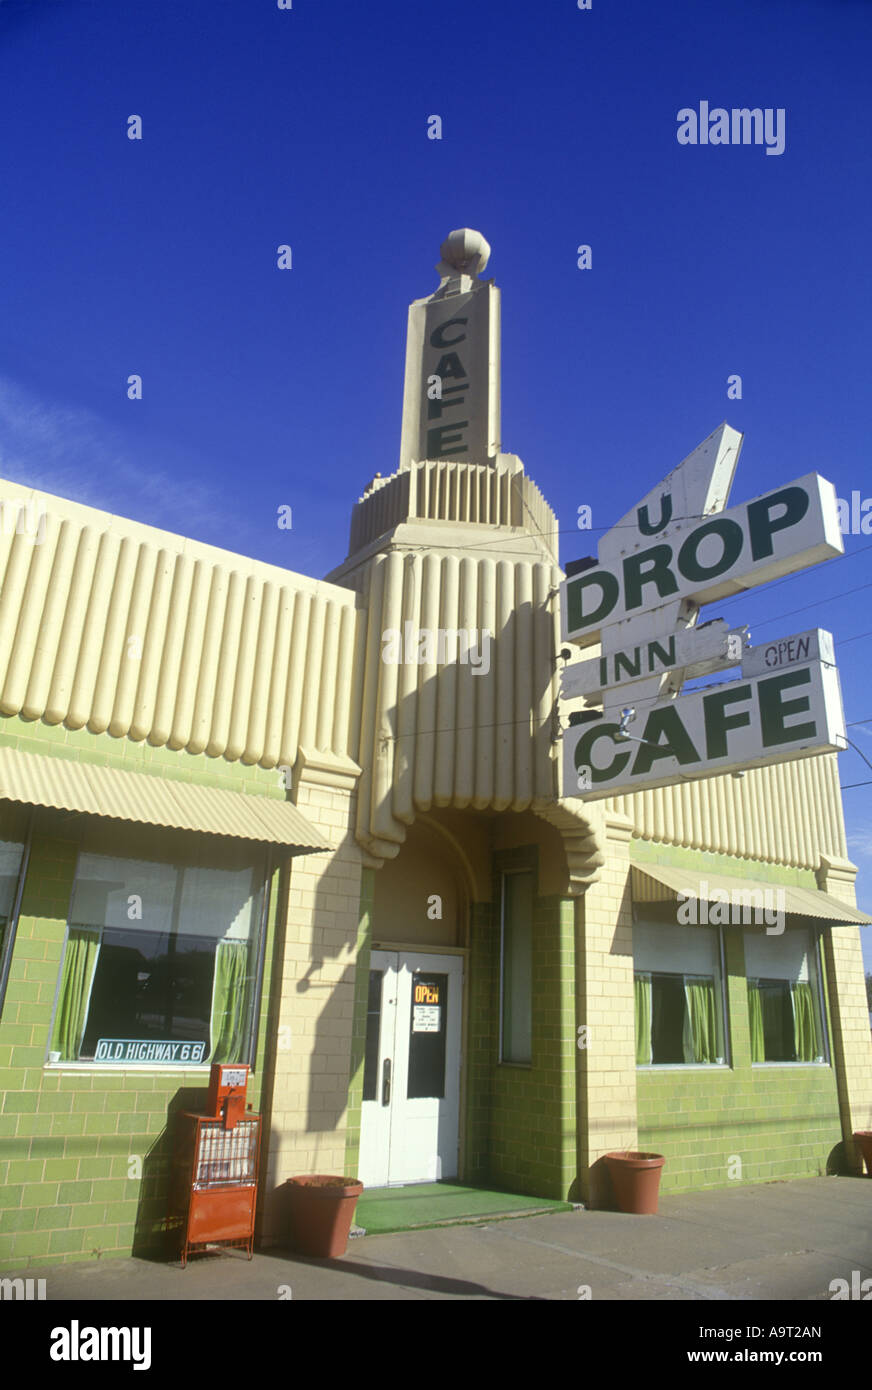 FAMOUS HISTORIC U DROP INN CAFE AMERICAN DINER SHAMROCK ROUTE 66 TEXAS USA Stock Photo